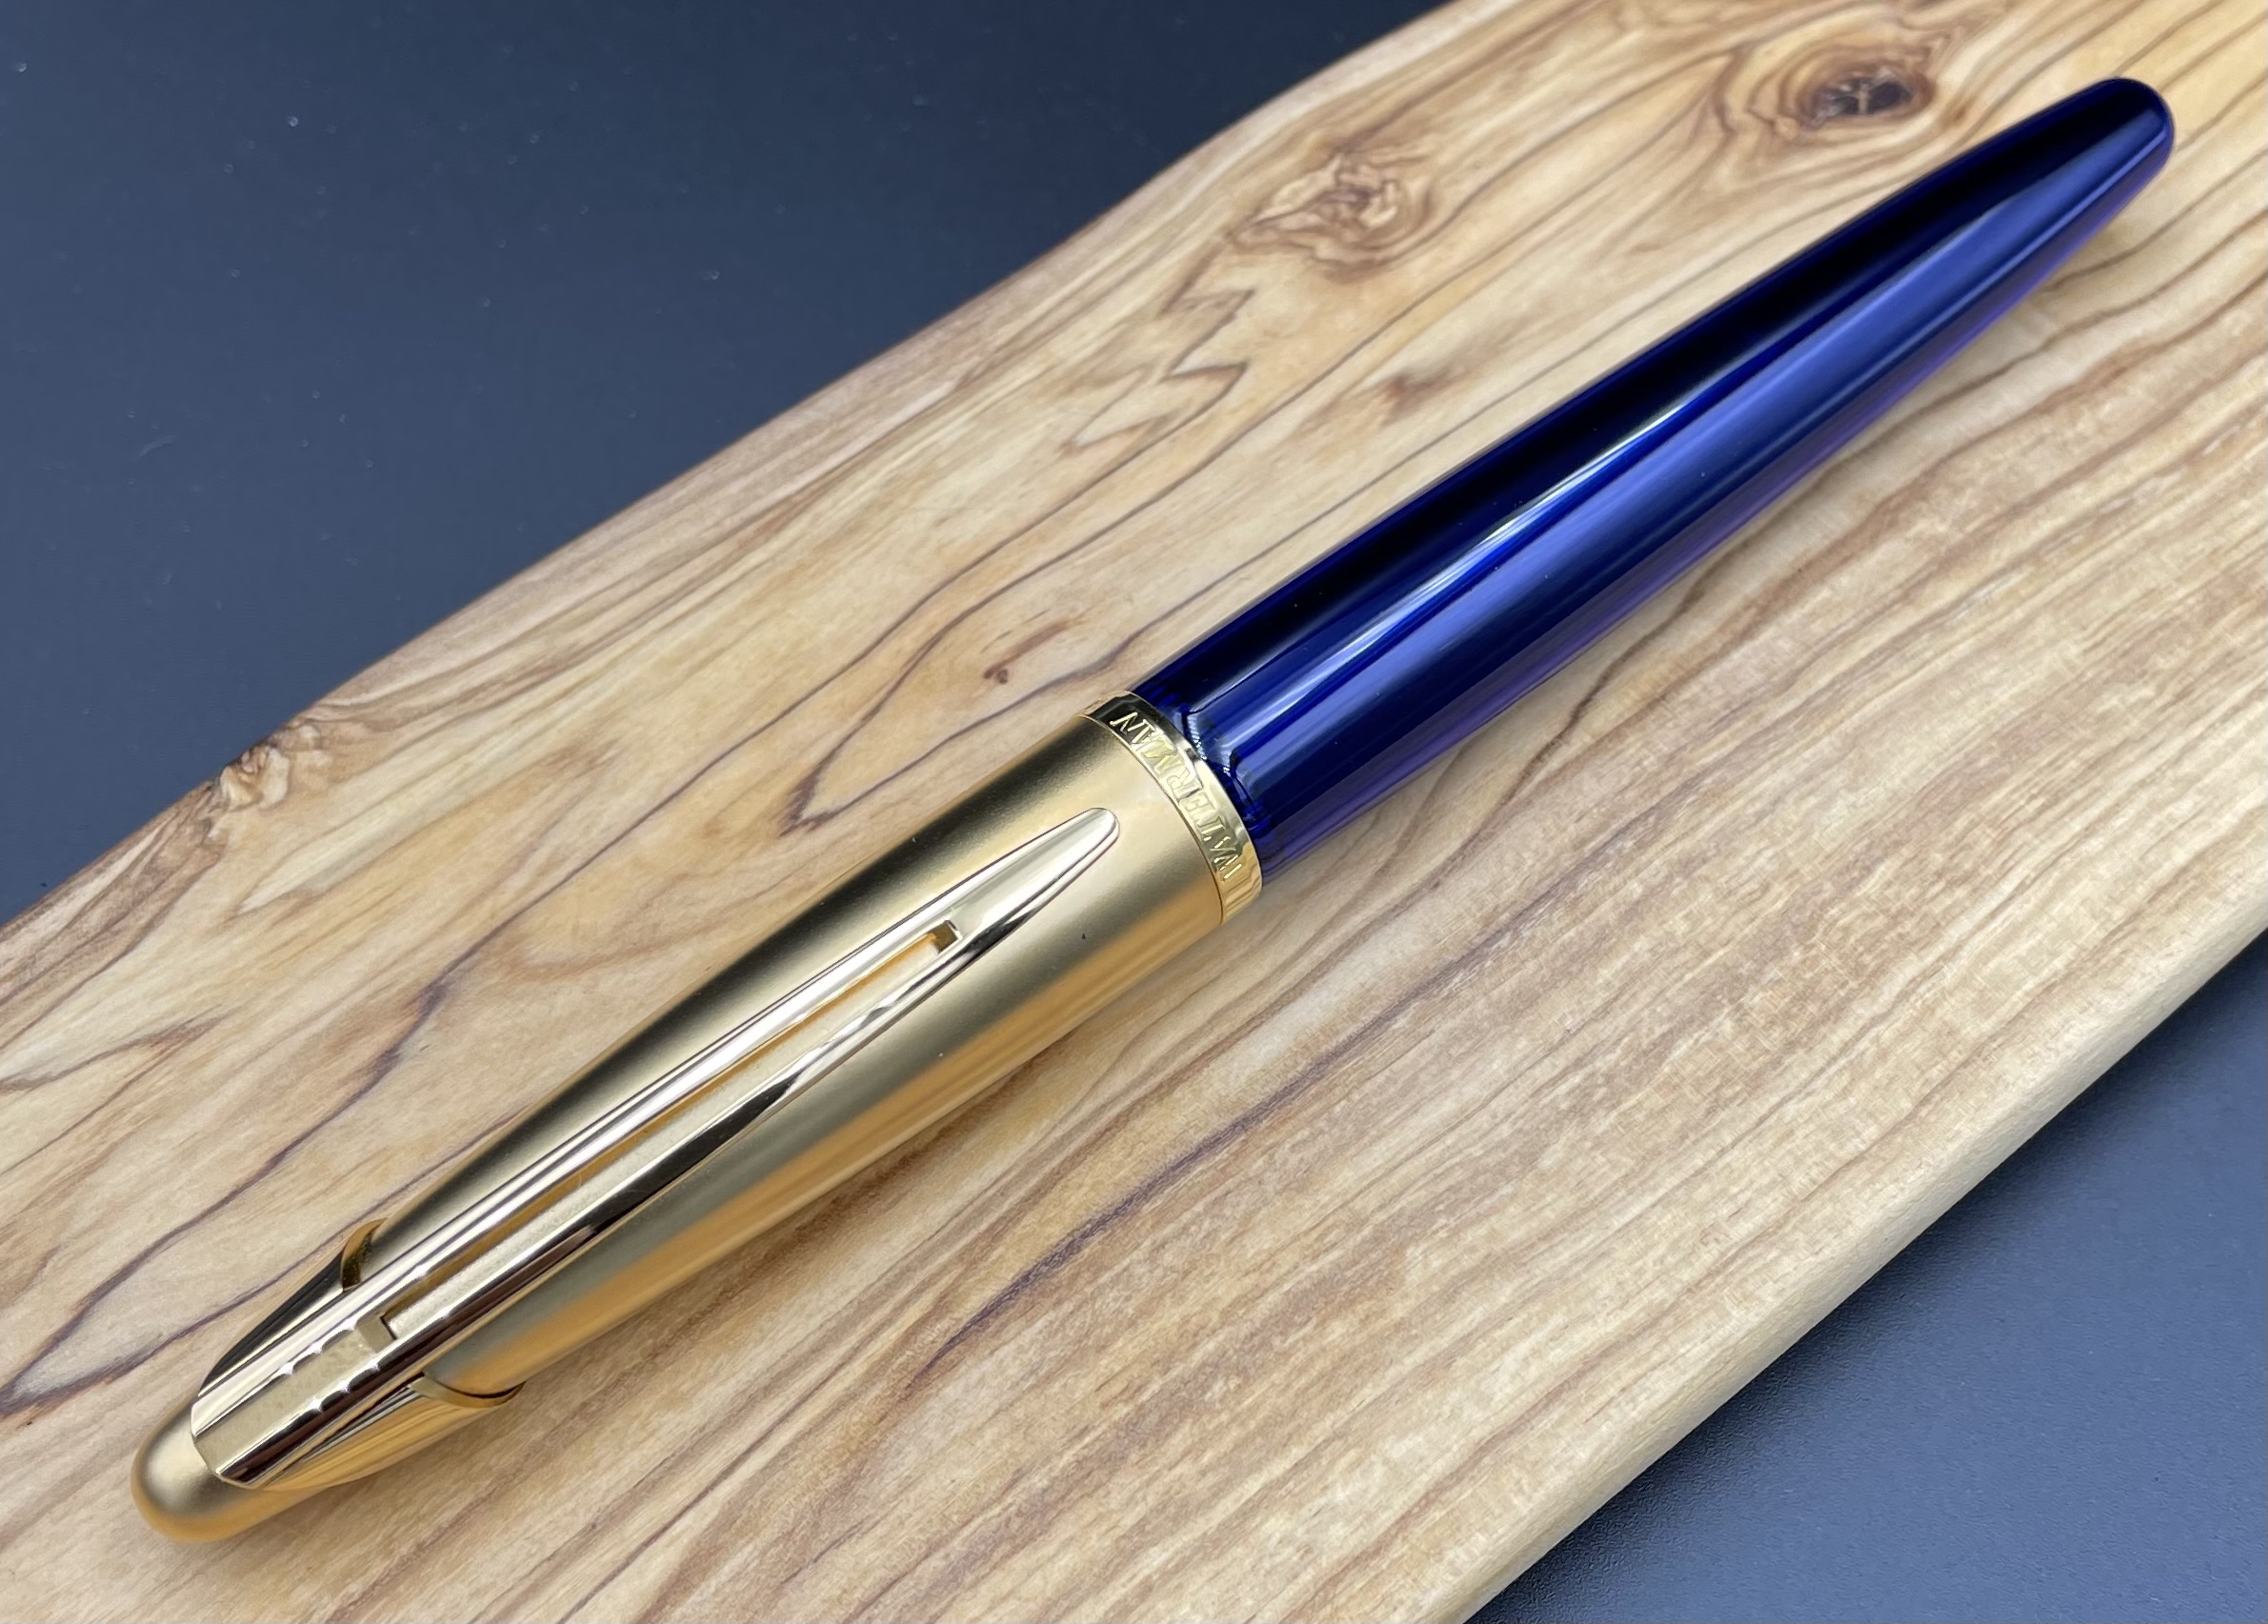  PART OF YOUR LIFE - Waterman Edson Fountain Pen in blue